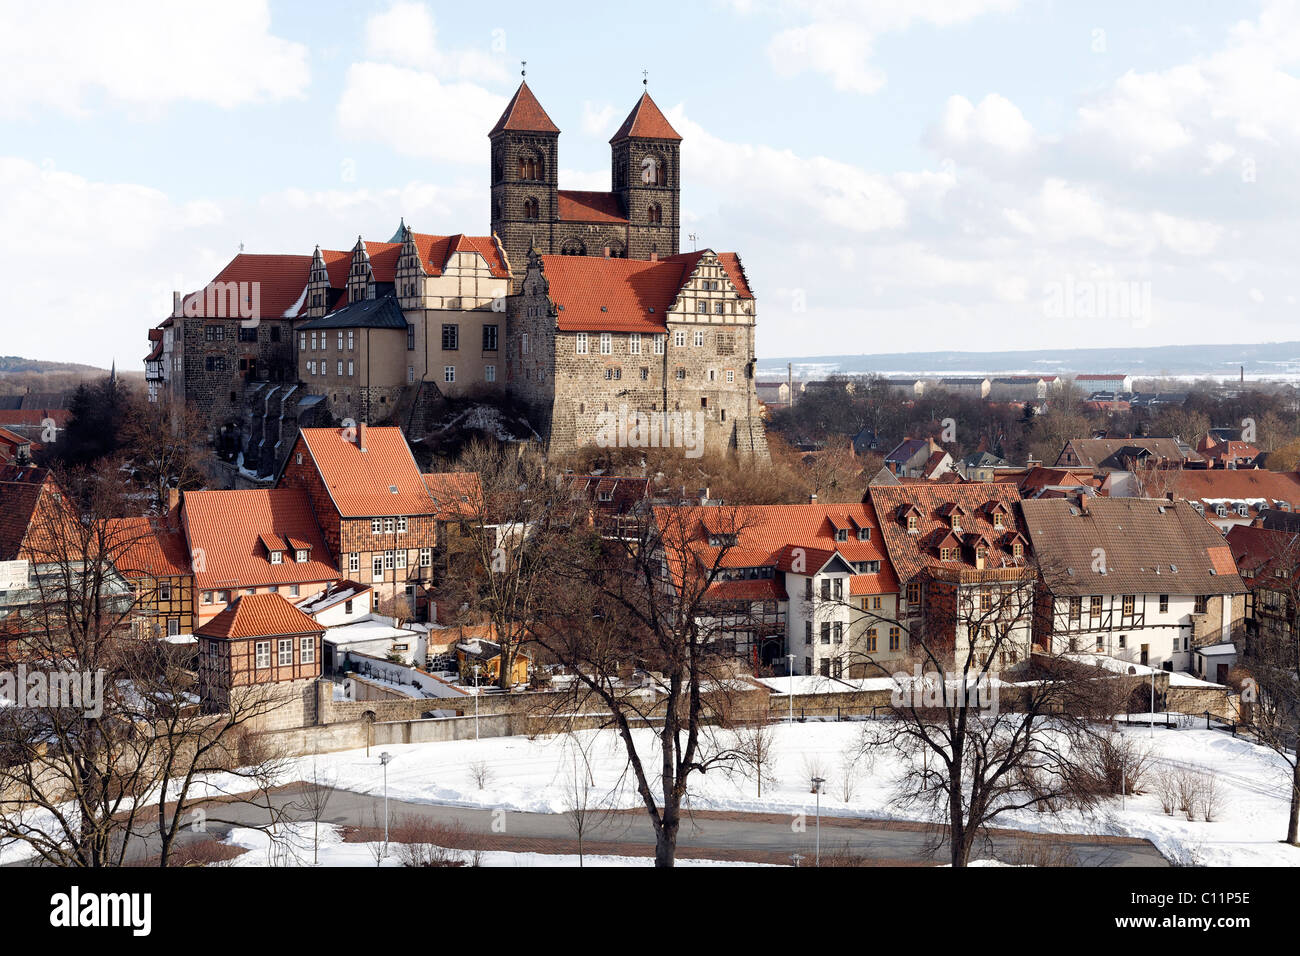 St. Servatii abbey church and castle hill, winter, Quedlinburg, Harz, Saxony-Anhalt, Germany, Europe Stock Photo